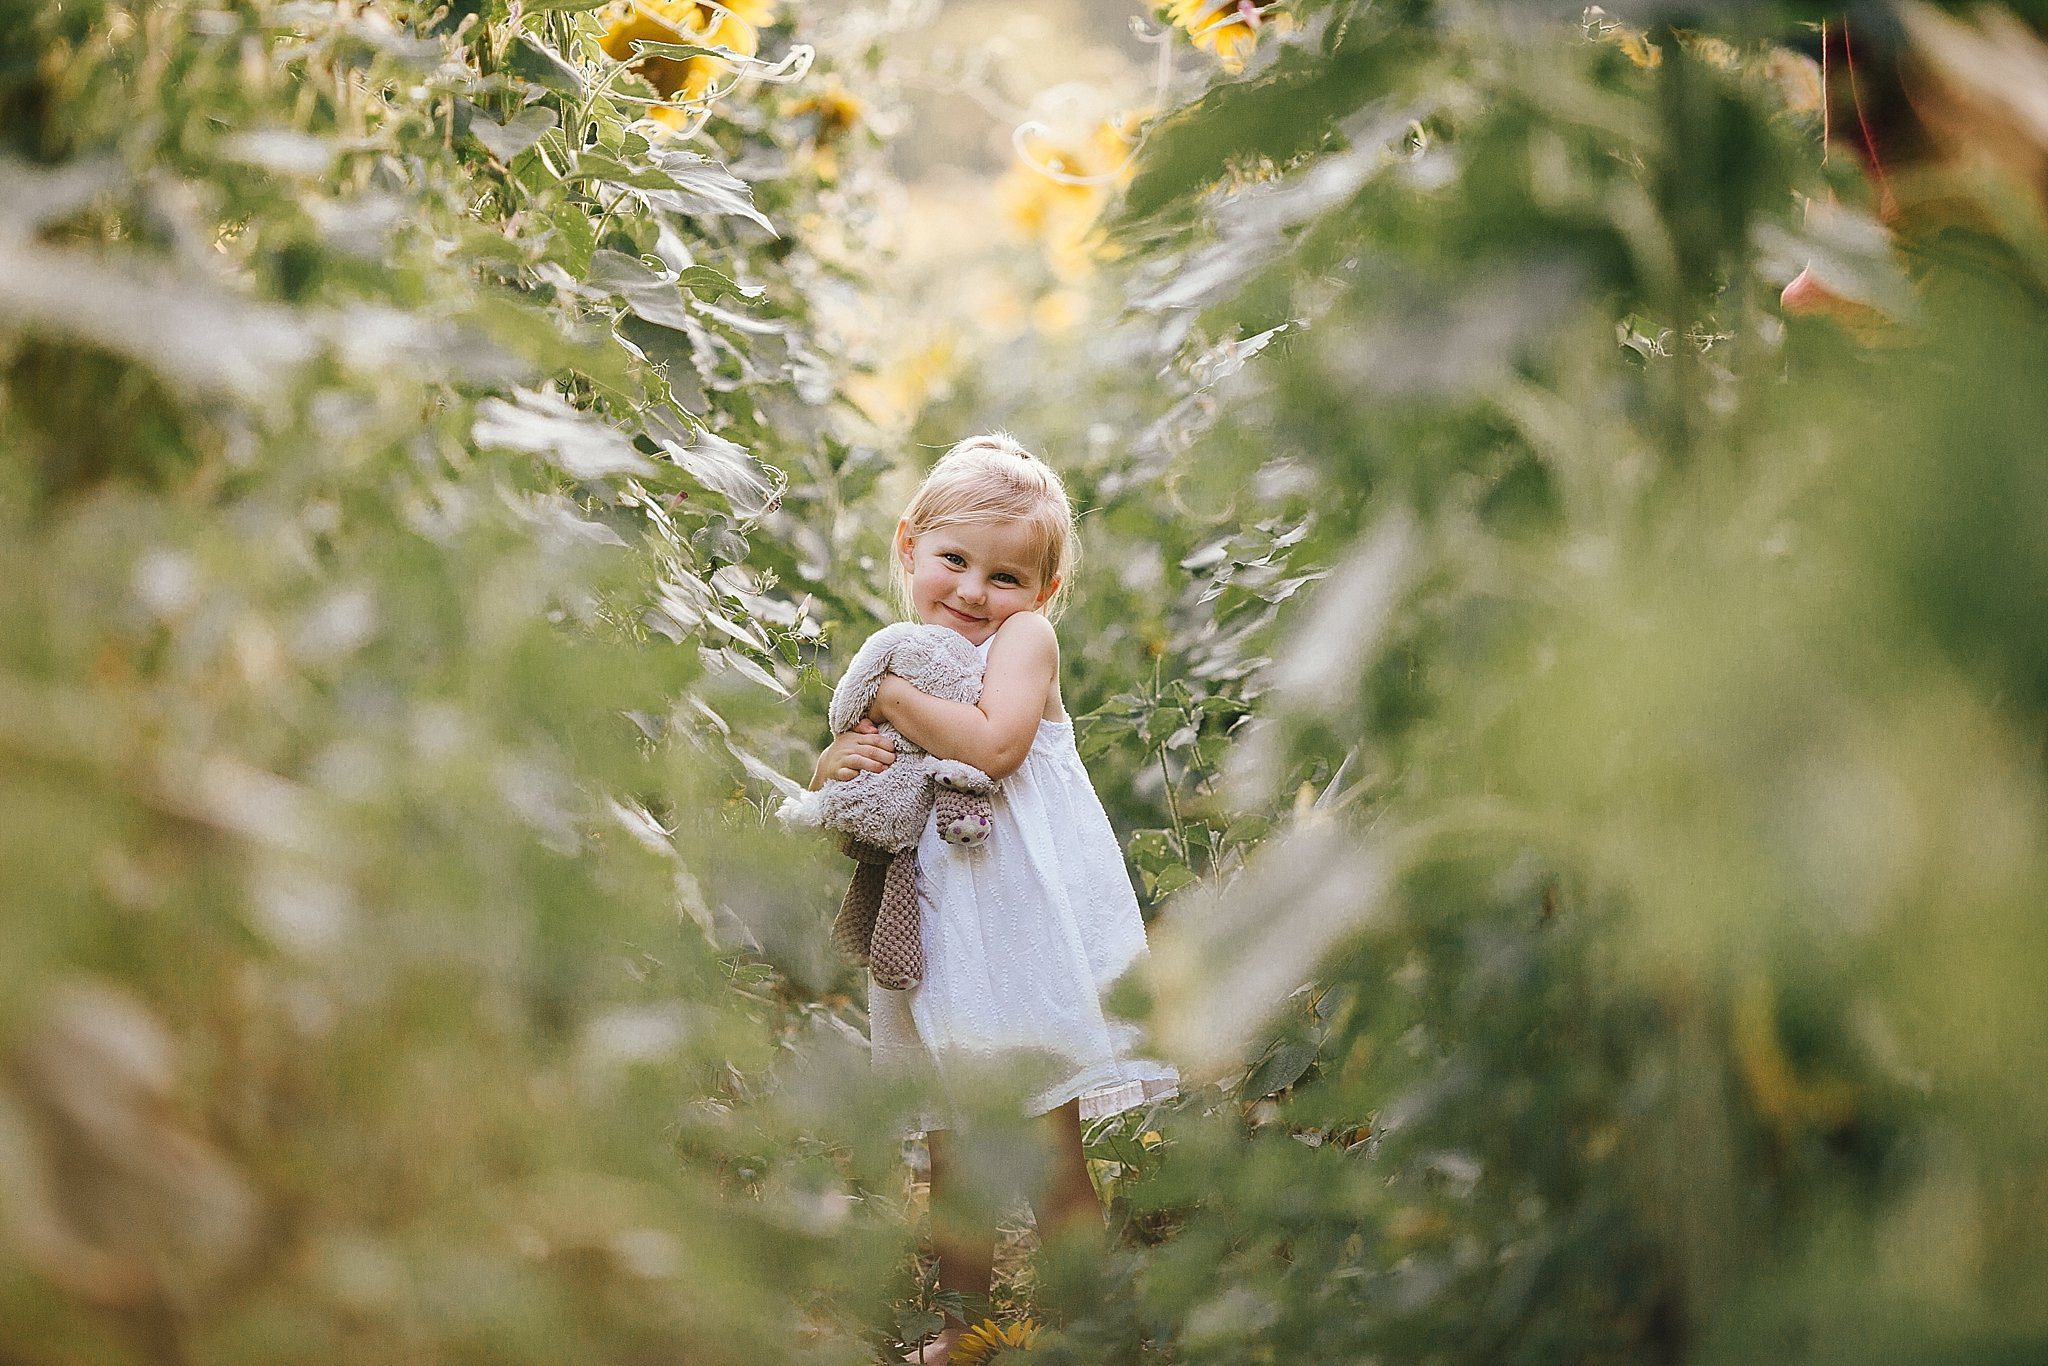 Sunflower Fields in Knoxville | Erin Morrison Photography www.erinmorrisonphotography.com